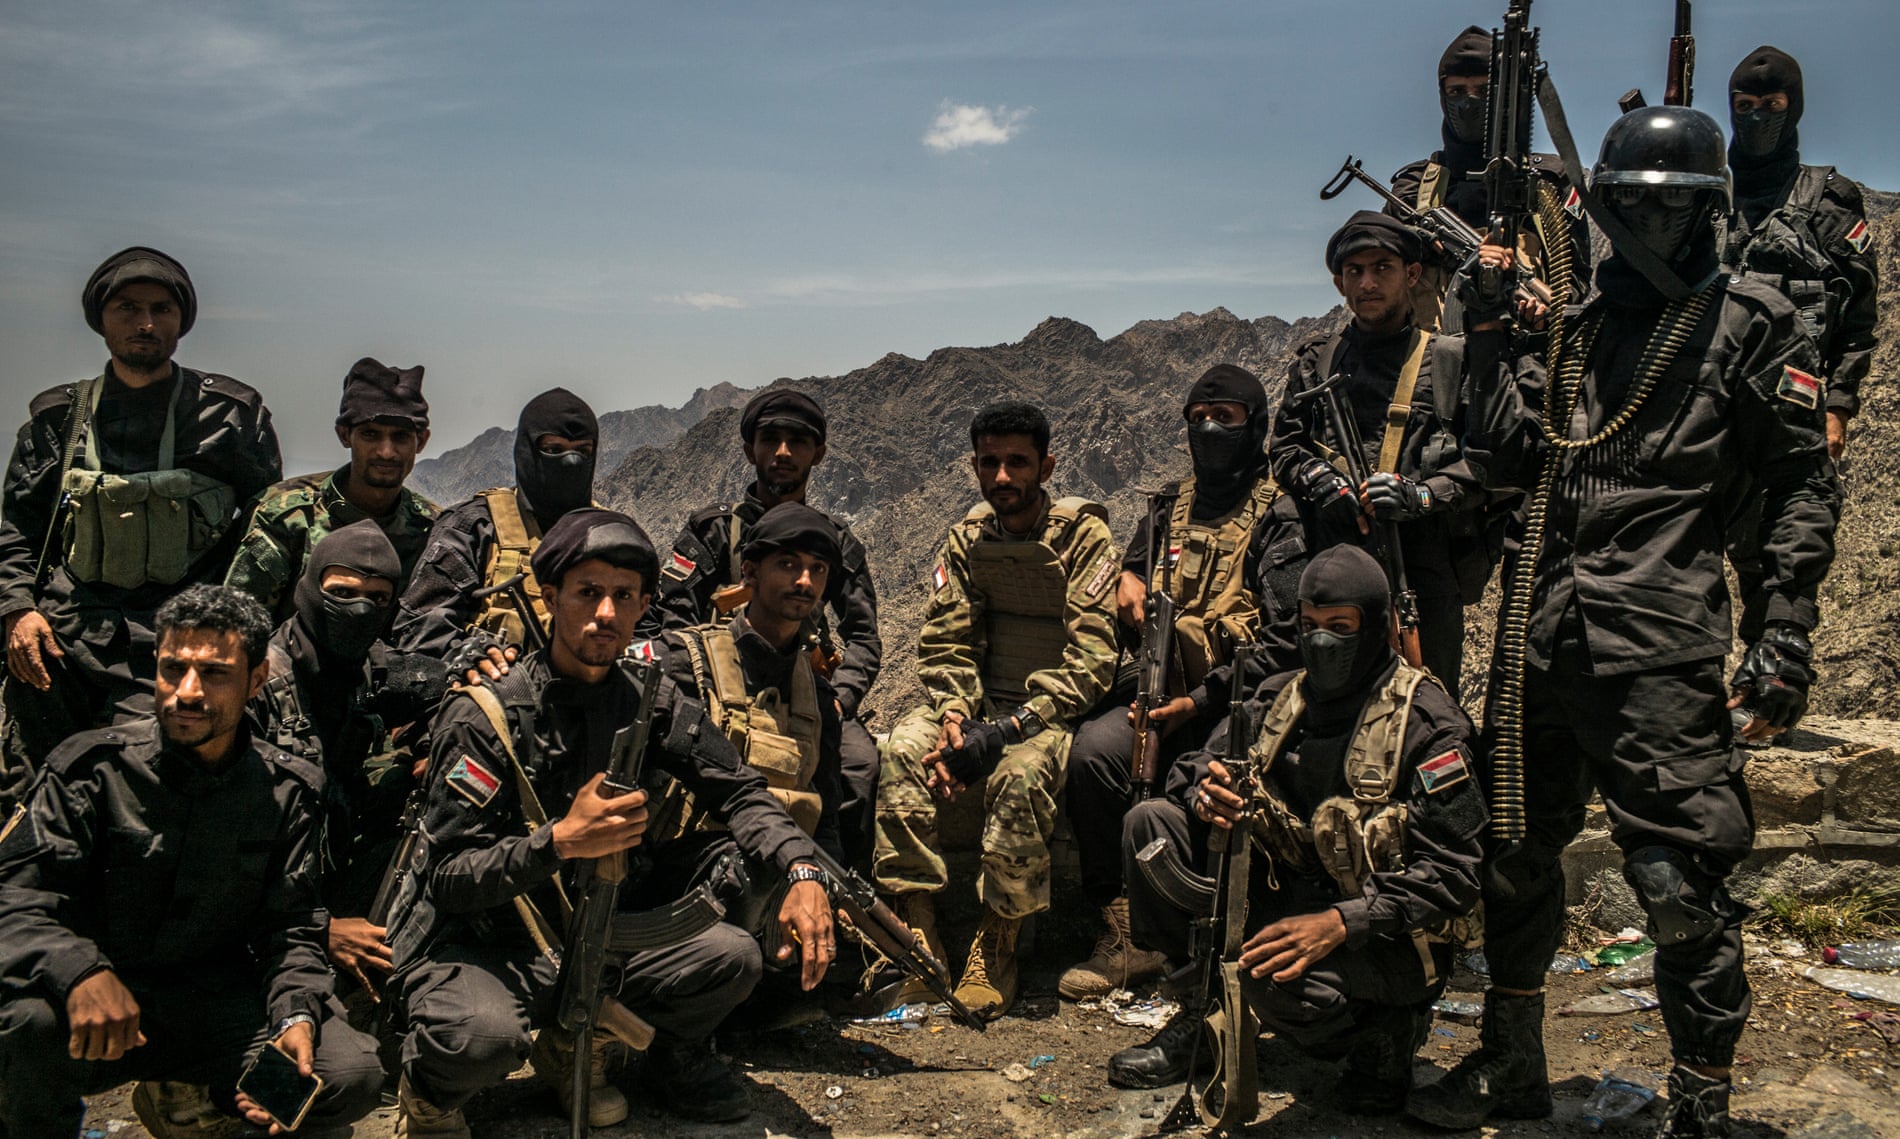 The UAE-backed ‘Security Belt’ militia (commanded by Abu al-Yamama, seated at centre) near their base north of Aden, Yemen.